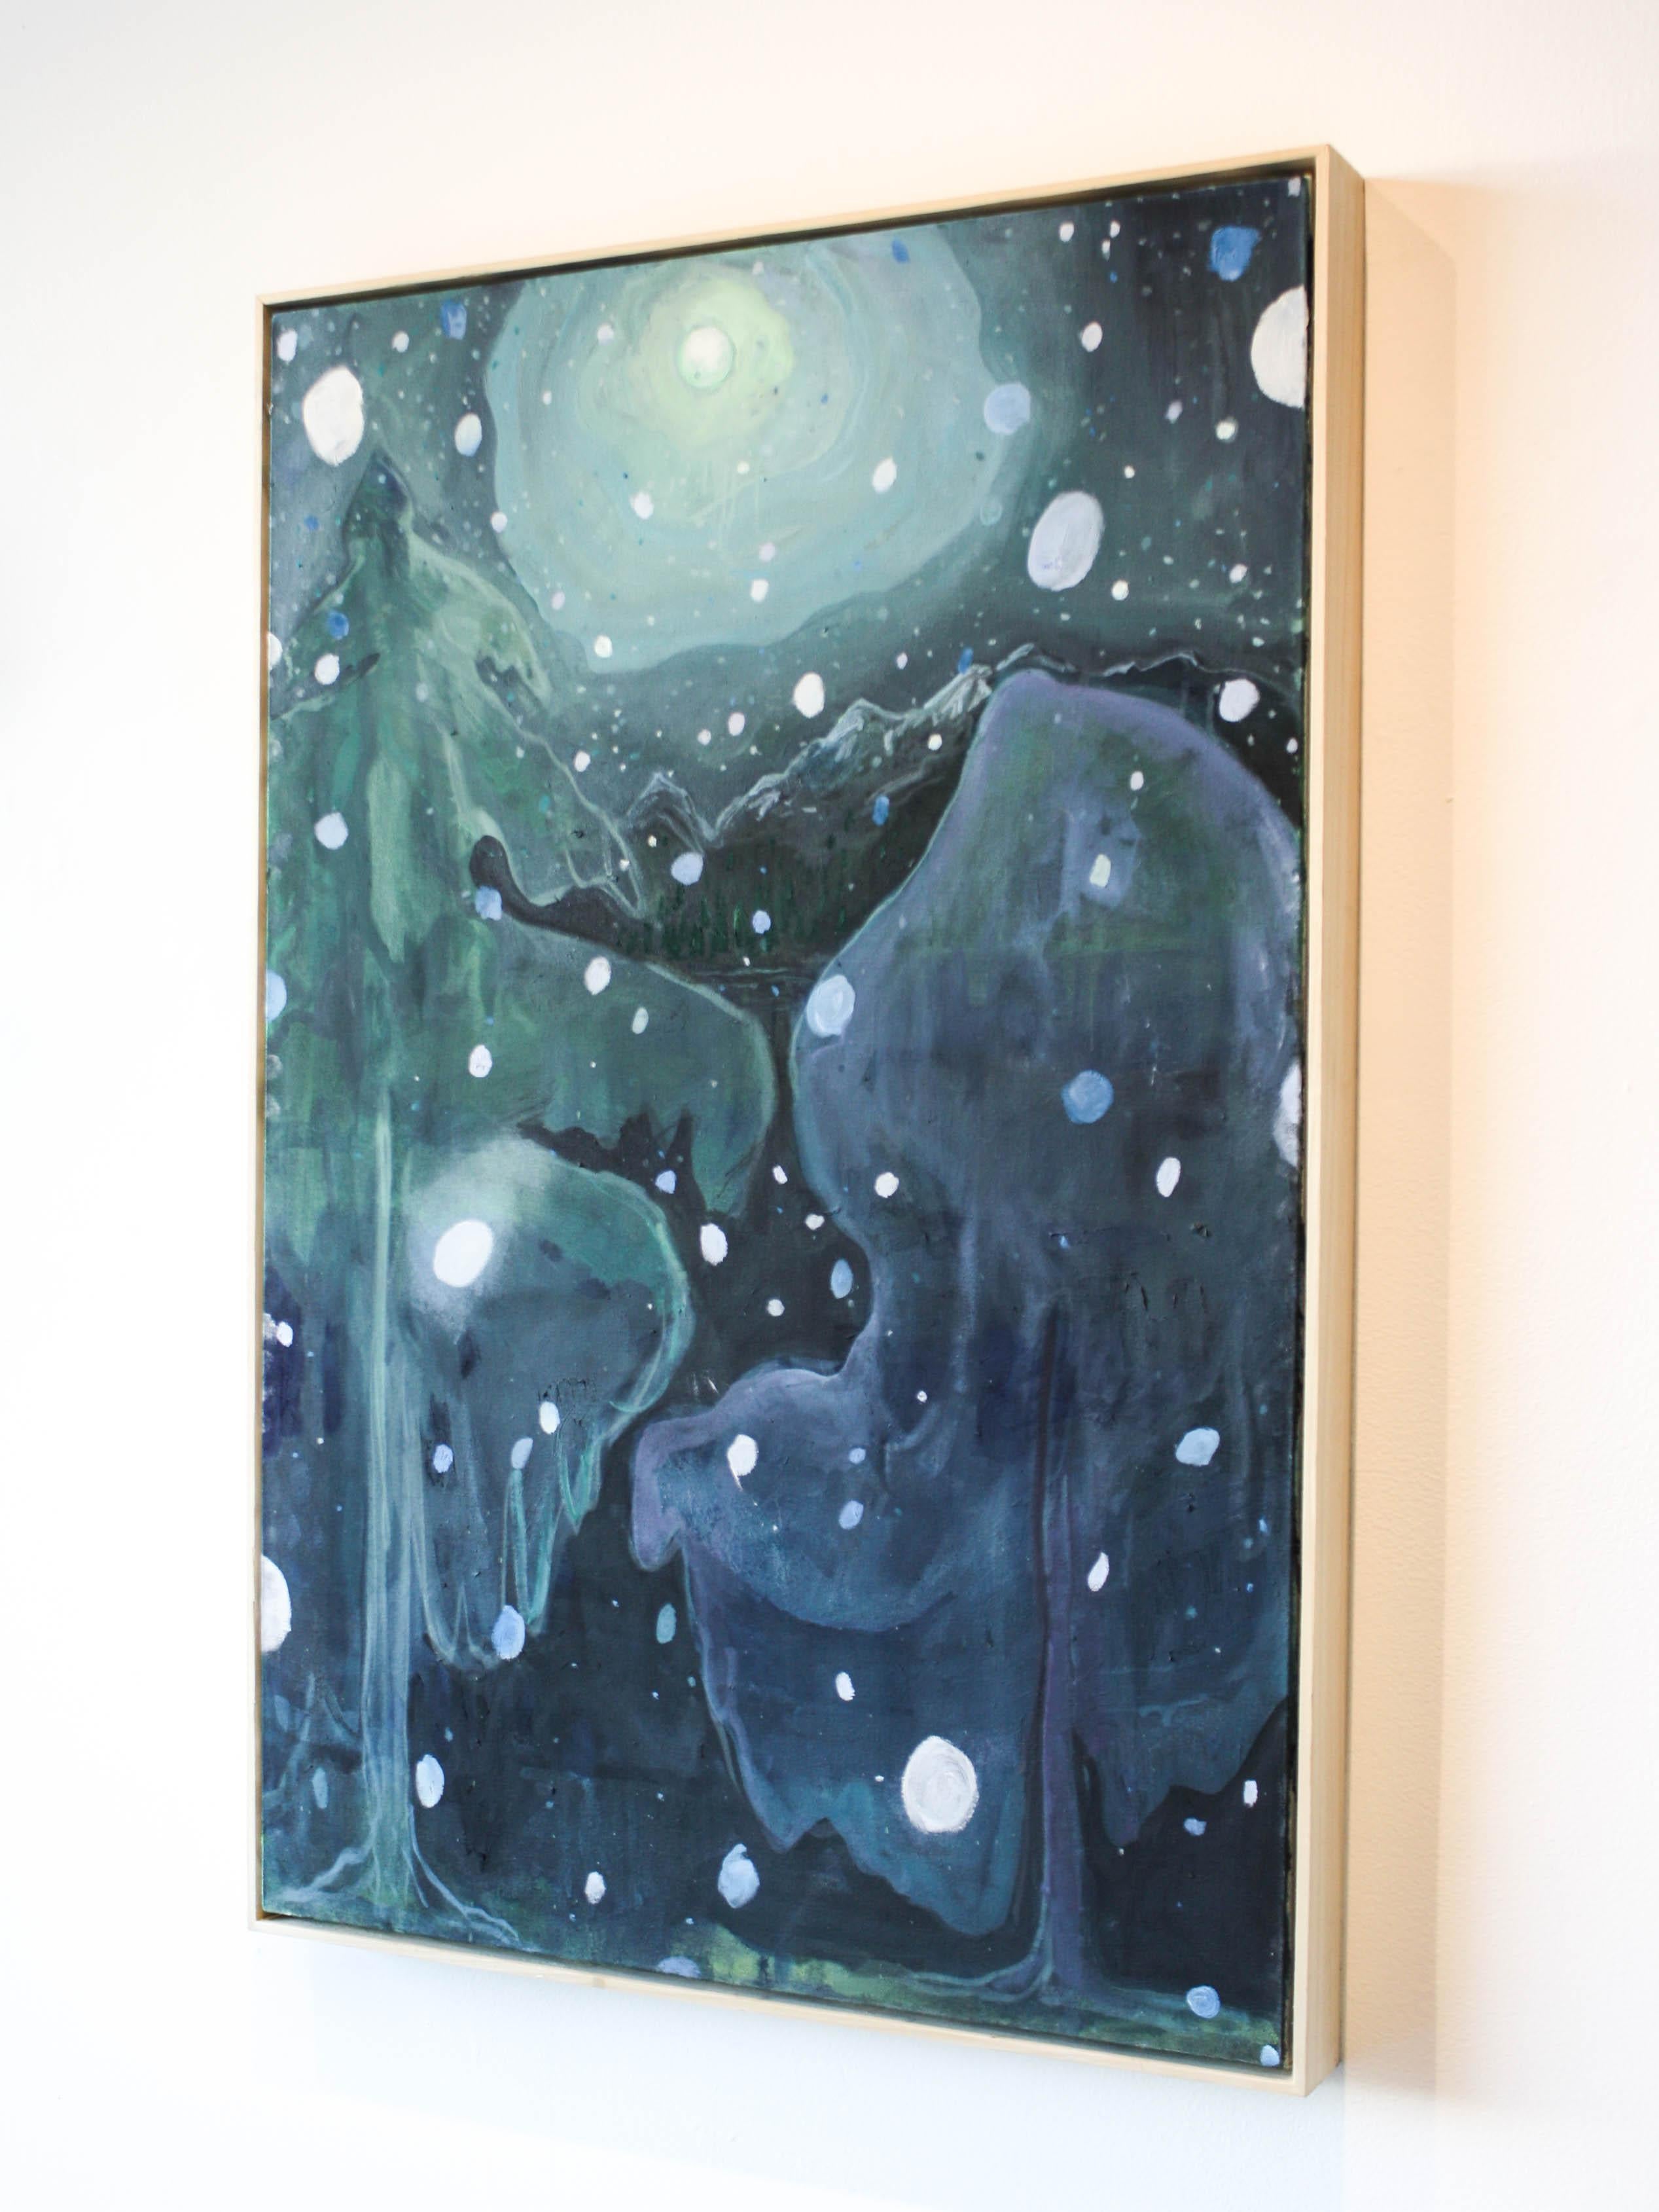 This landscape oil painting on canvas is a depiction of trees at nighttime in the moonlight. It is rendered with deep blues and teals. 

My work is about Place. For me, no space is permanent and home is not a fixed entity. Pulling from themes